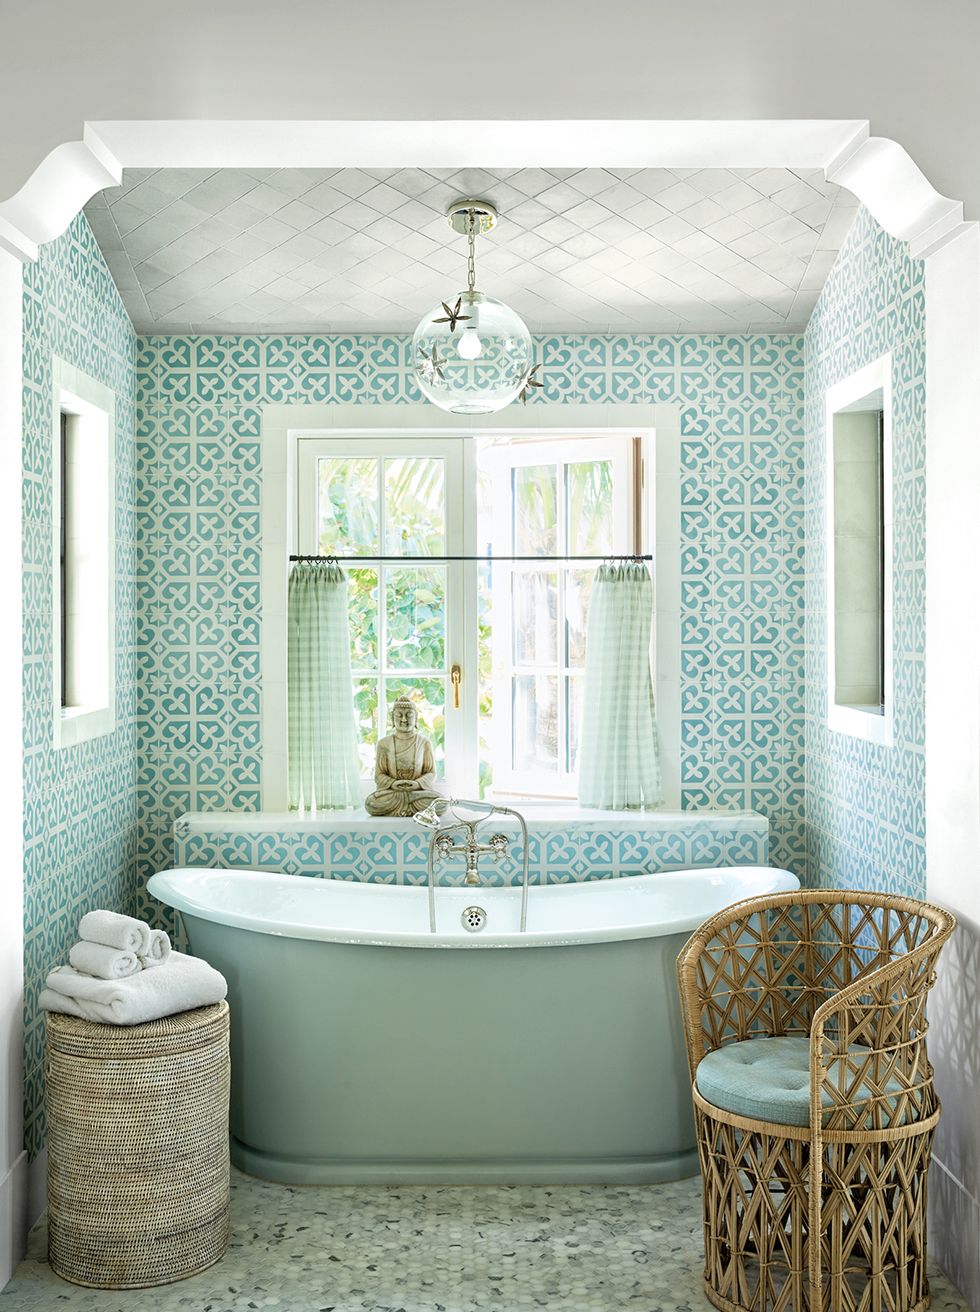 Breathtaking aqua tile and luxurious freestanding tub in a coastal home with interior design by Tom Scheerer. Photo by Francesco Lagnese - source: Elle Decor. Timeless Tastemaker Trifecta: Lisa Fine, Tom Scheerer and Miguel Flores-Vianna...in case you admire sophisticated design.